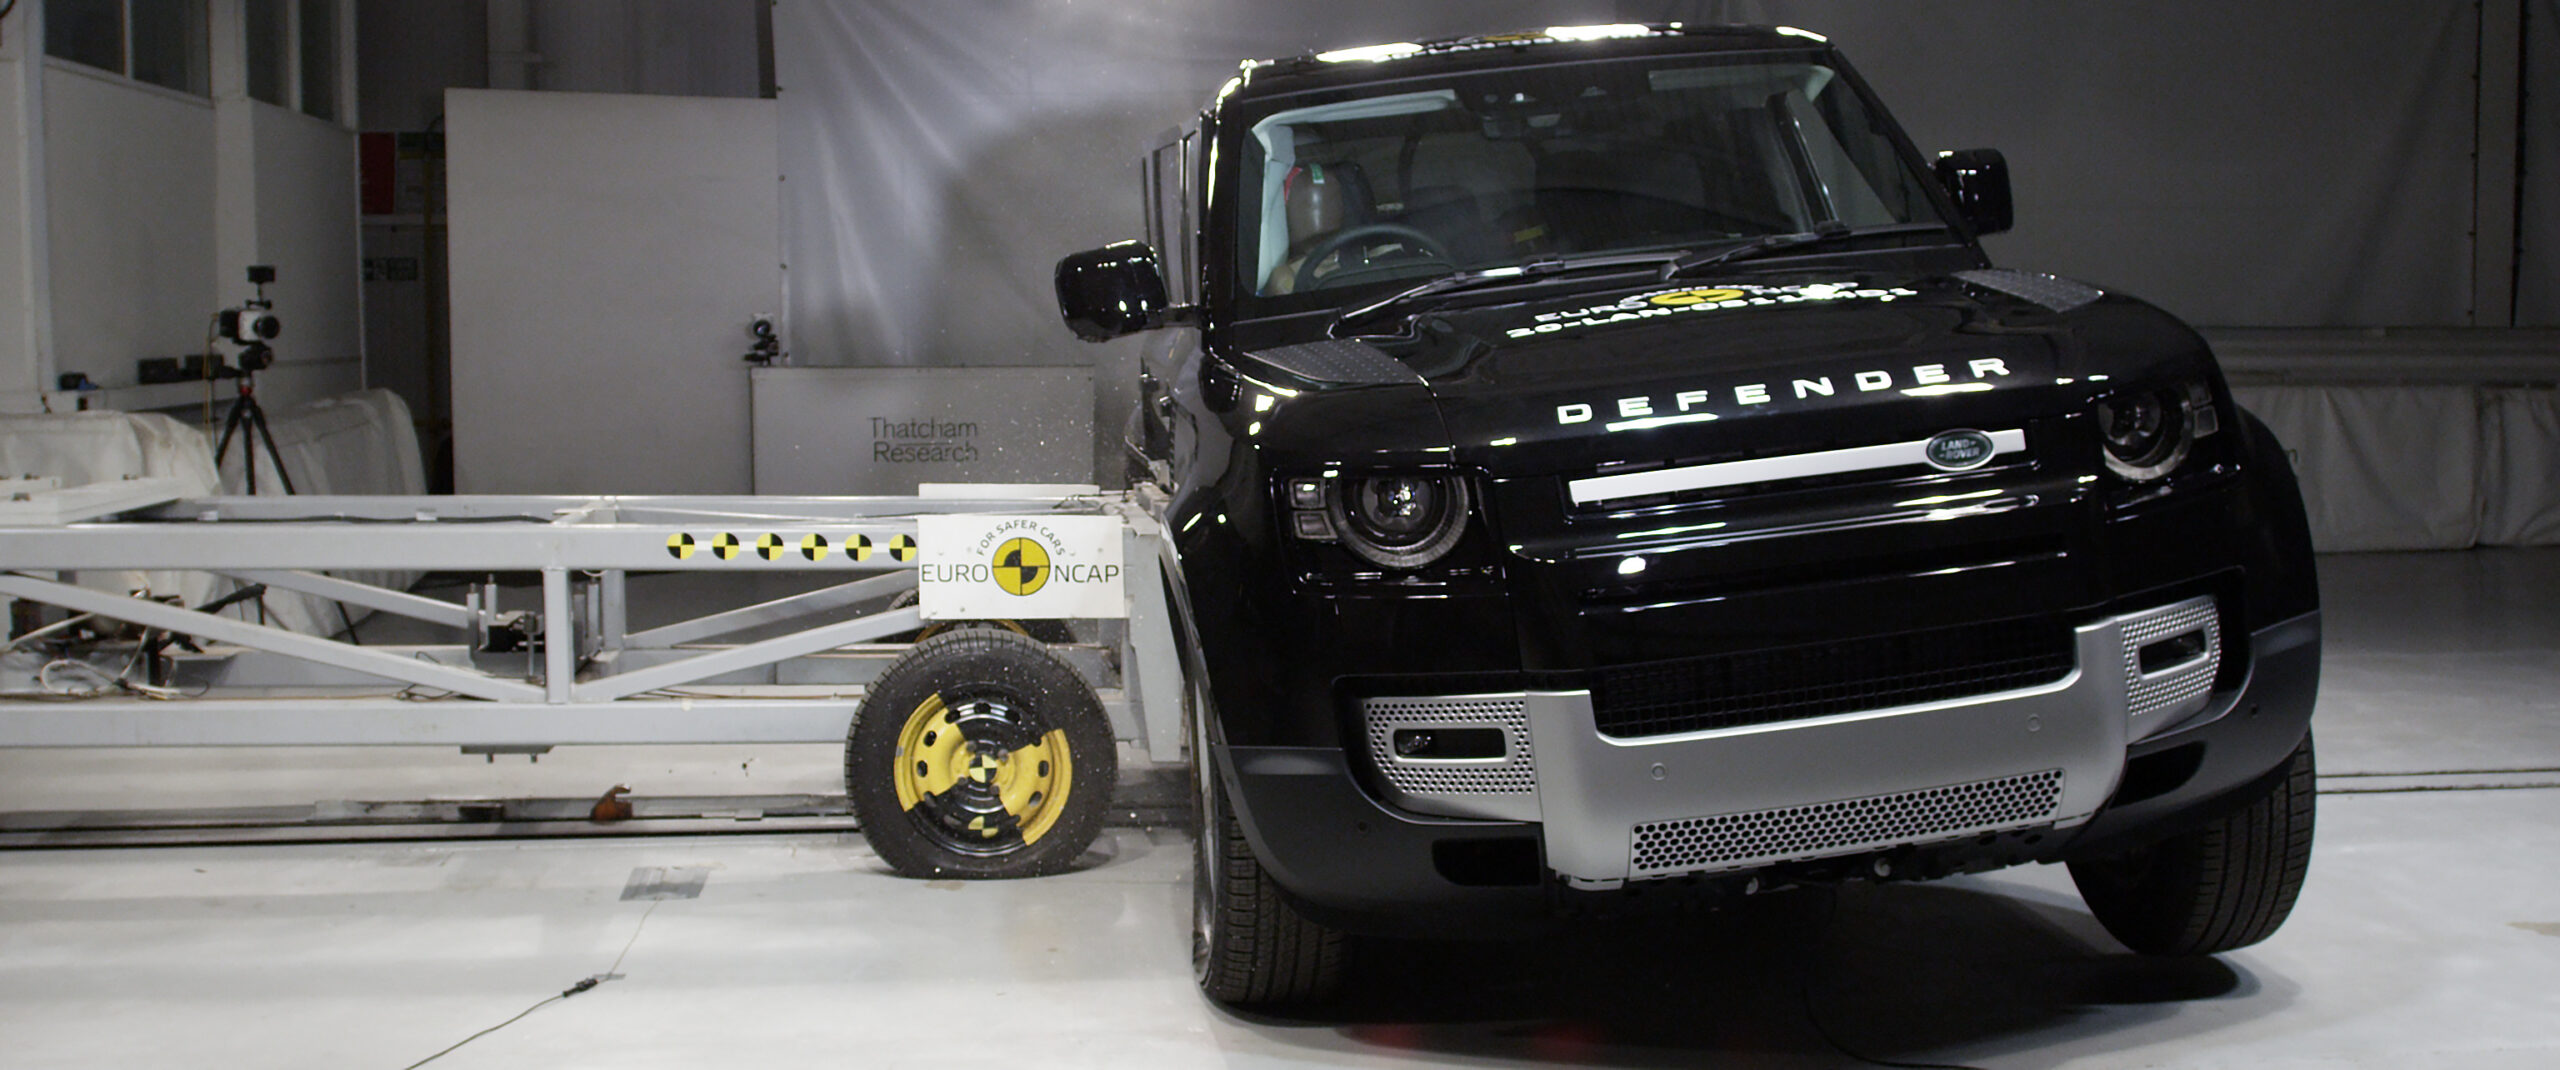 5 Star Safety Rating For Land Rover Defender From Euro NCAP